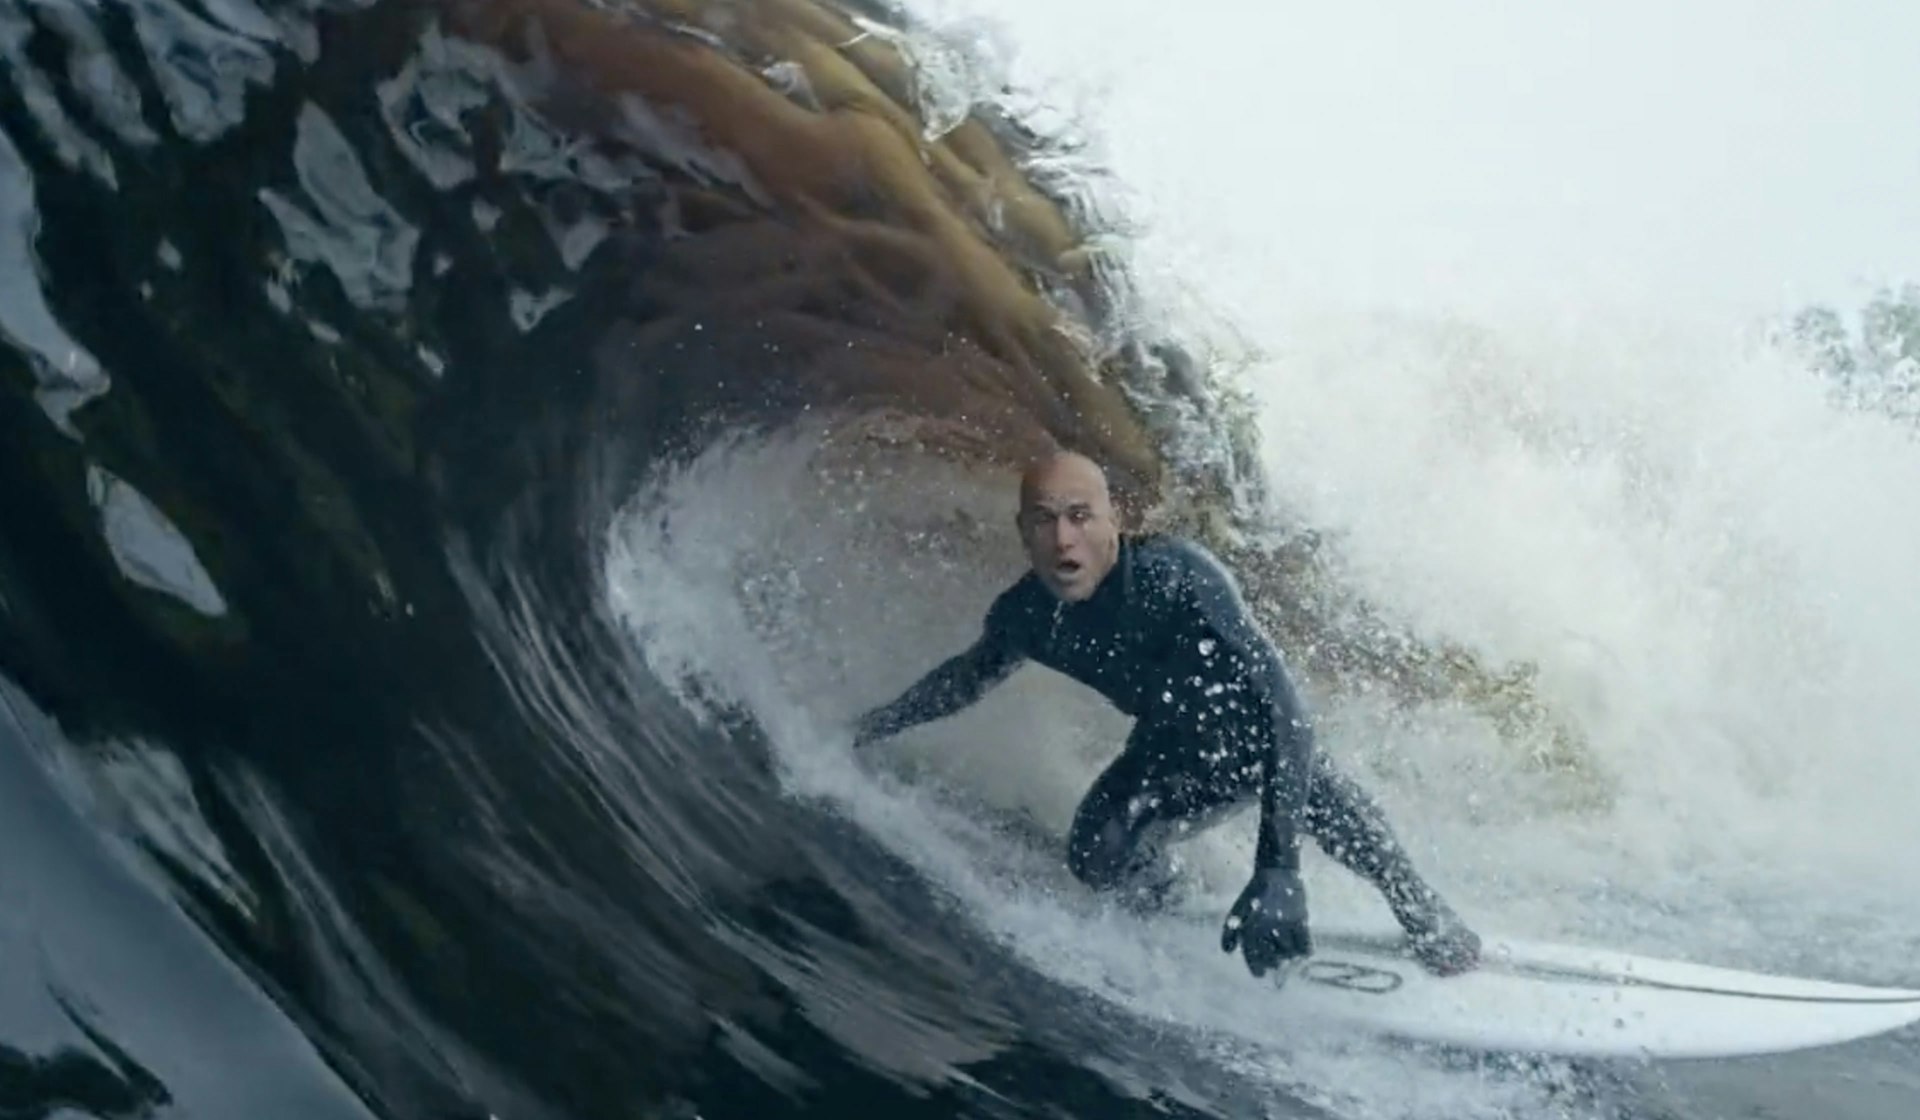 Video: Kelly Slater surfs his company’s first artificial wave